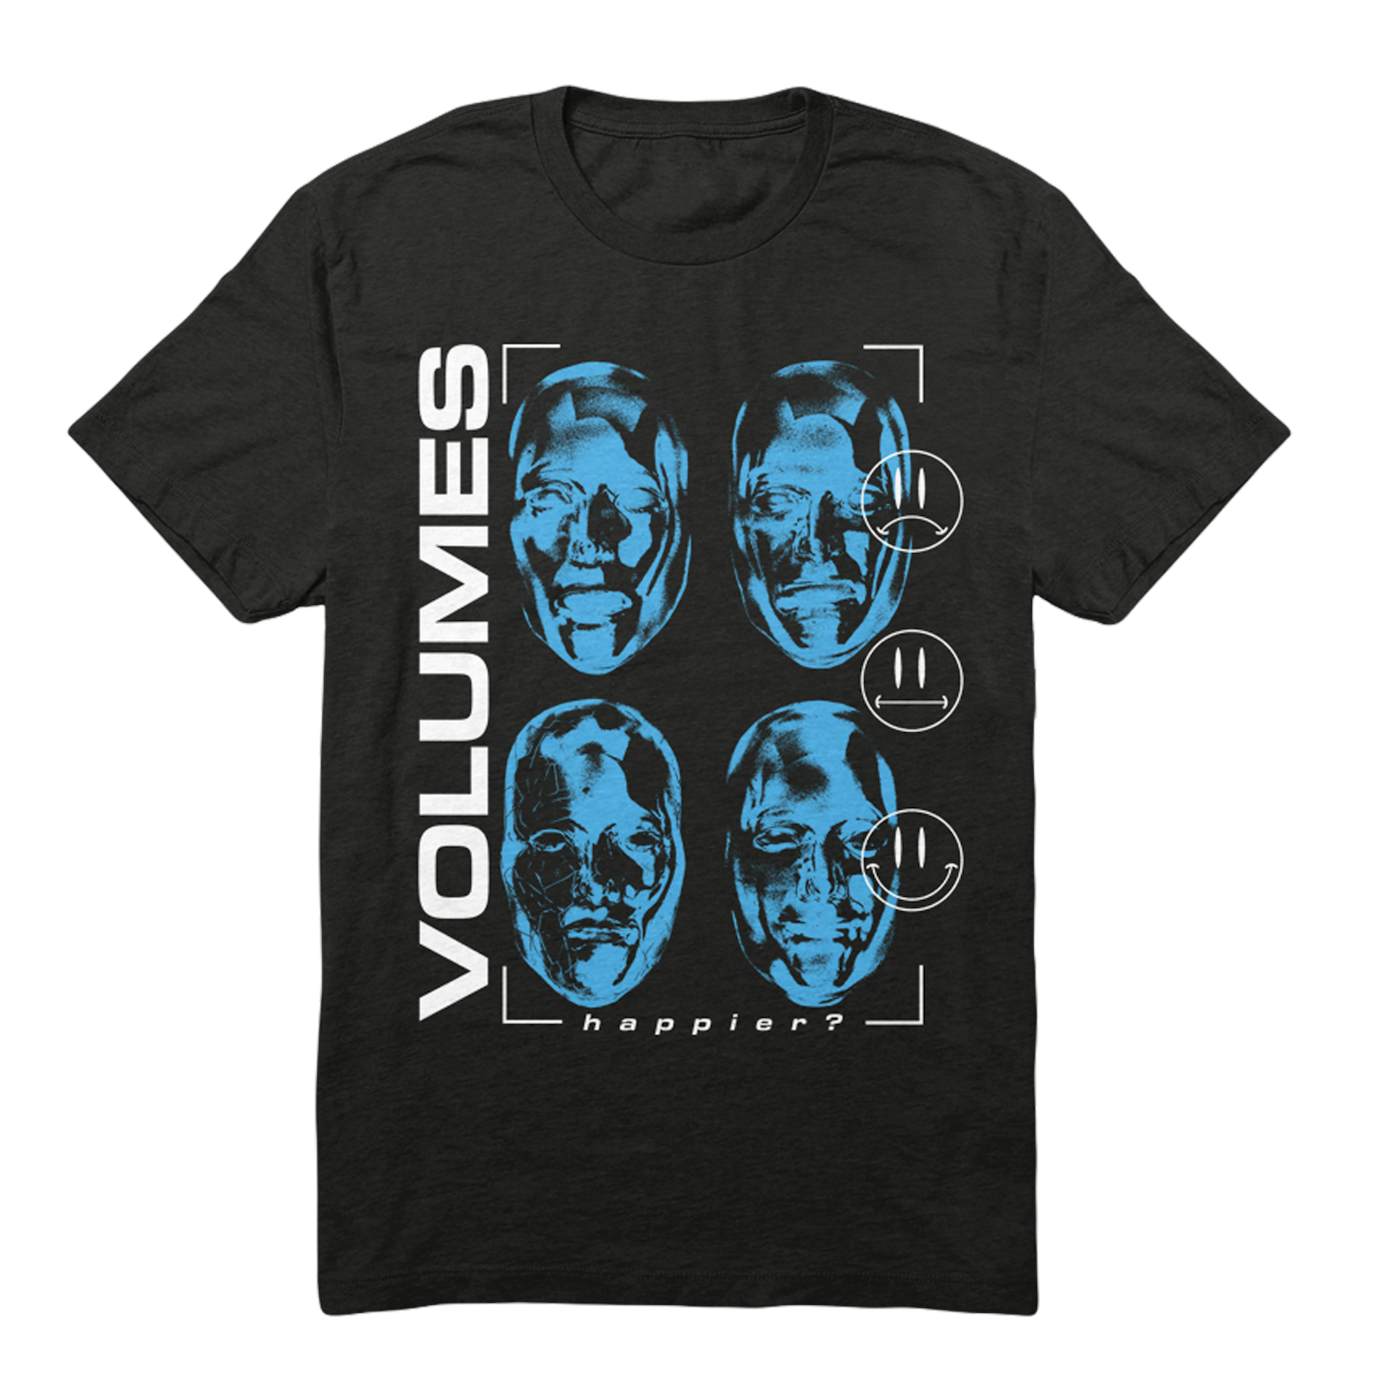 Volumes "Happier? Phases" T-Shirt